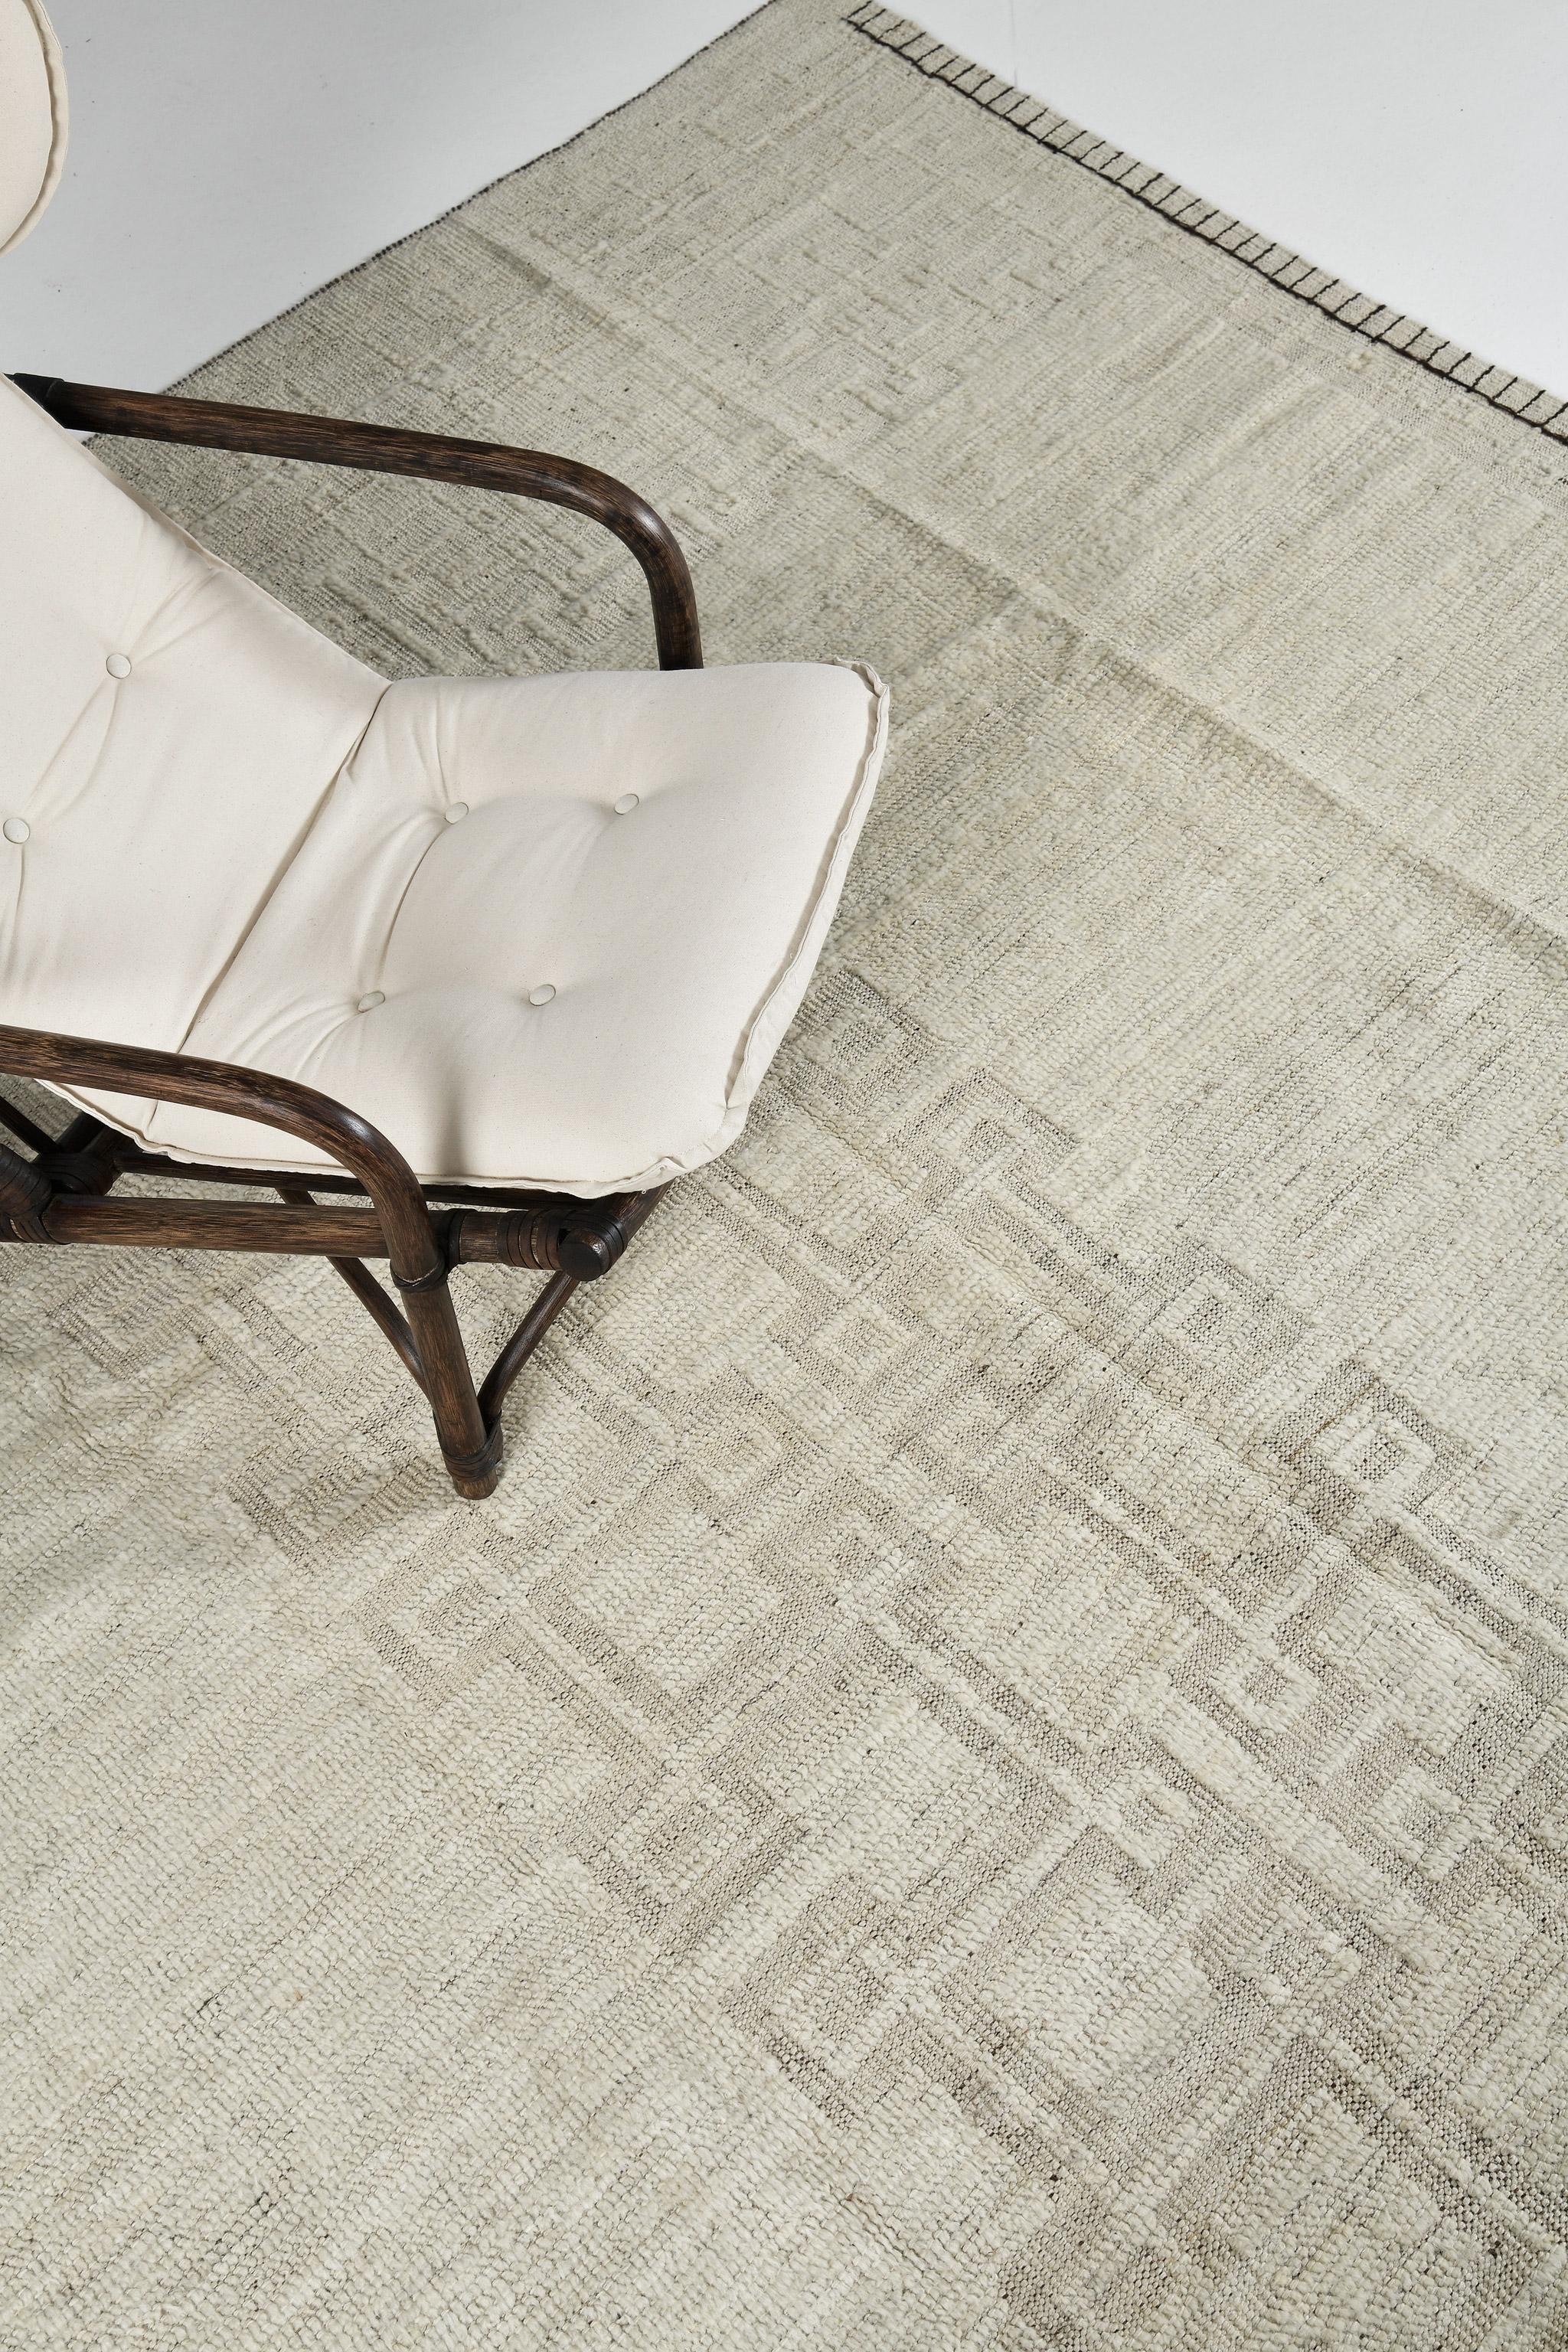 Natir in Nomad Collection features symbolic elements running along through the center in this stunning rug. Featuring the washed effect of ecru and taupe colour scheme, this amazing rug oozes elegance. With its sophisticated vibe, this rug is a